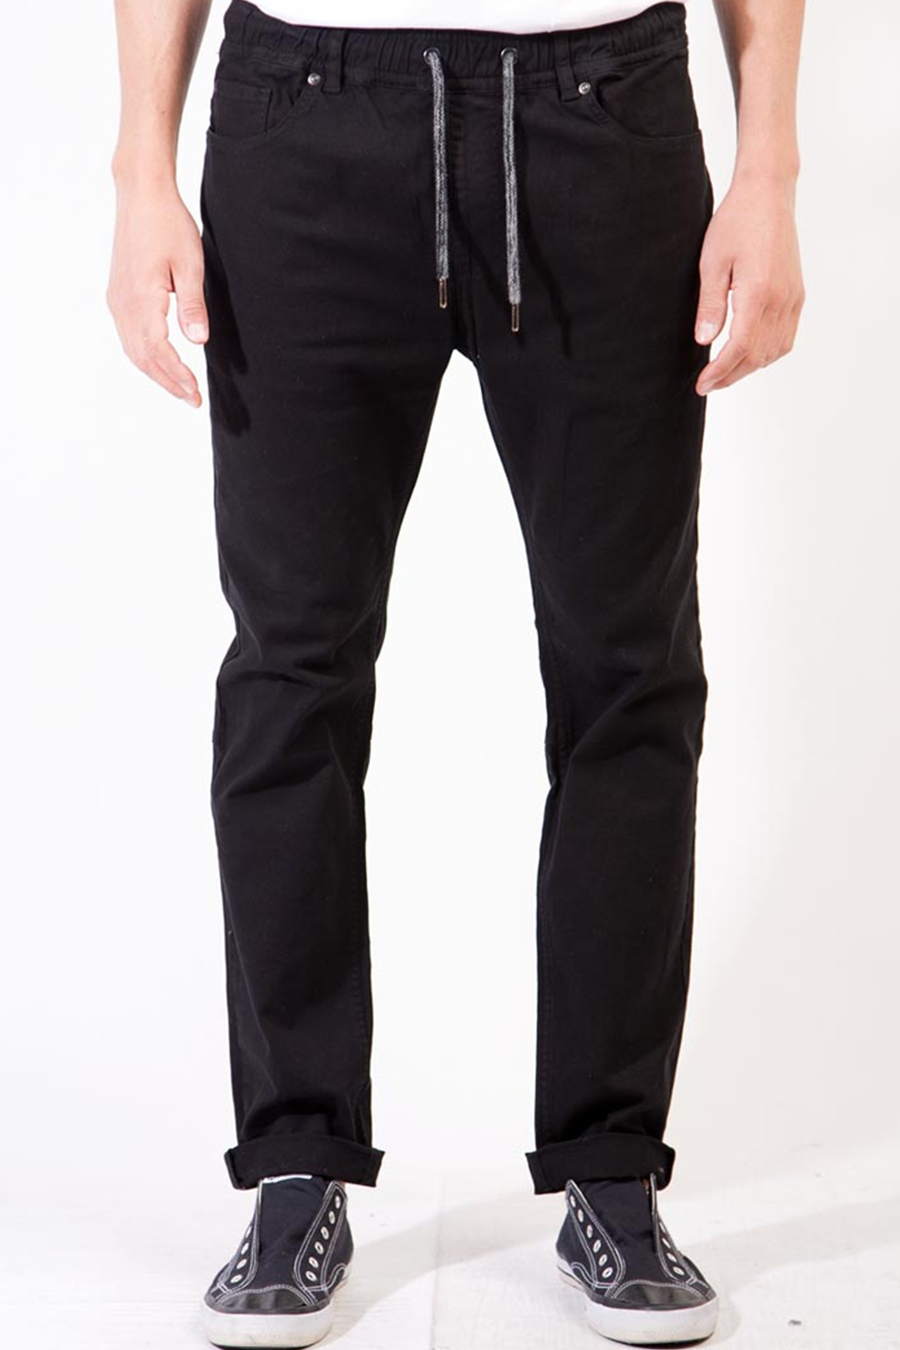 Edwin Slouch Pant | Black - Main Image Number 1 of 3